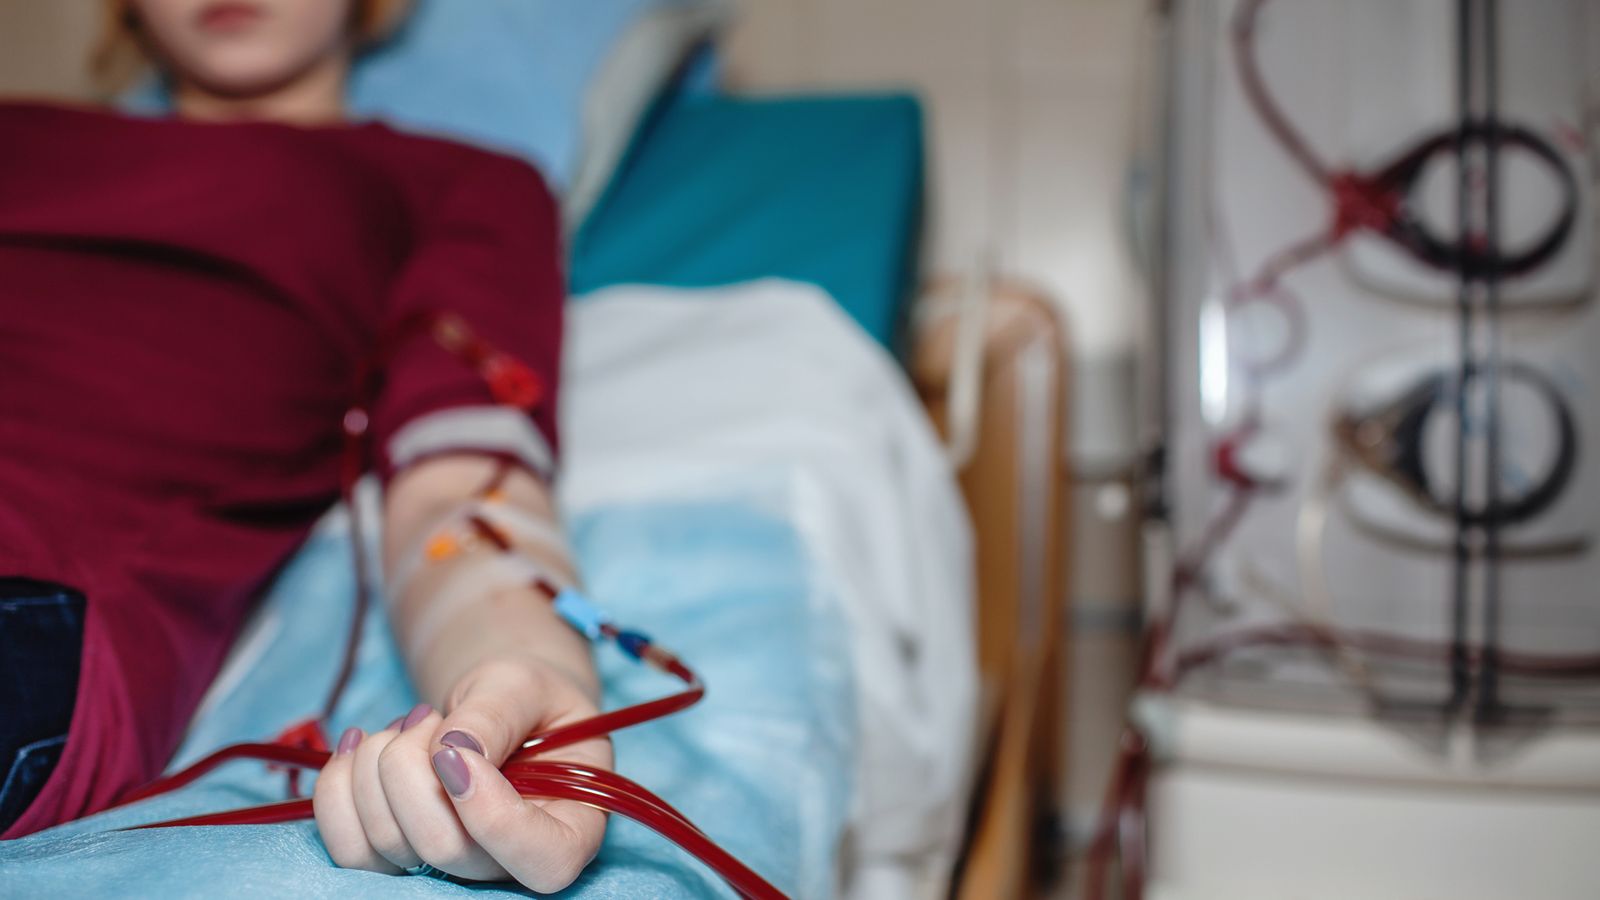 Kidney disease 'could become public health emergency' without more funding, charity warns